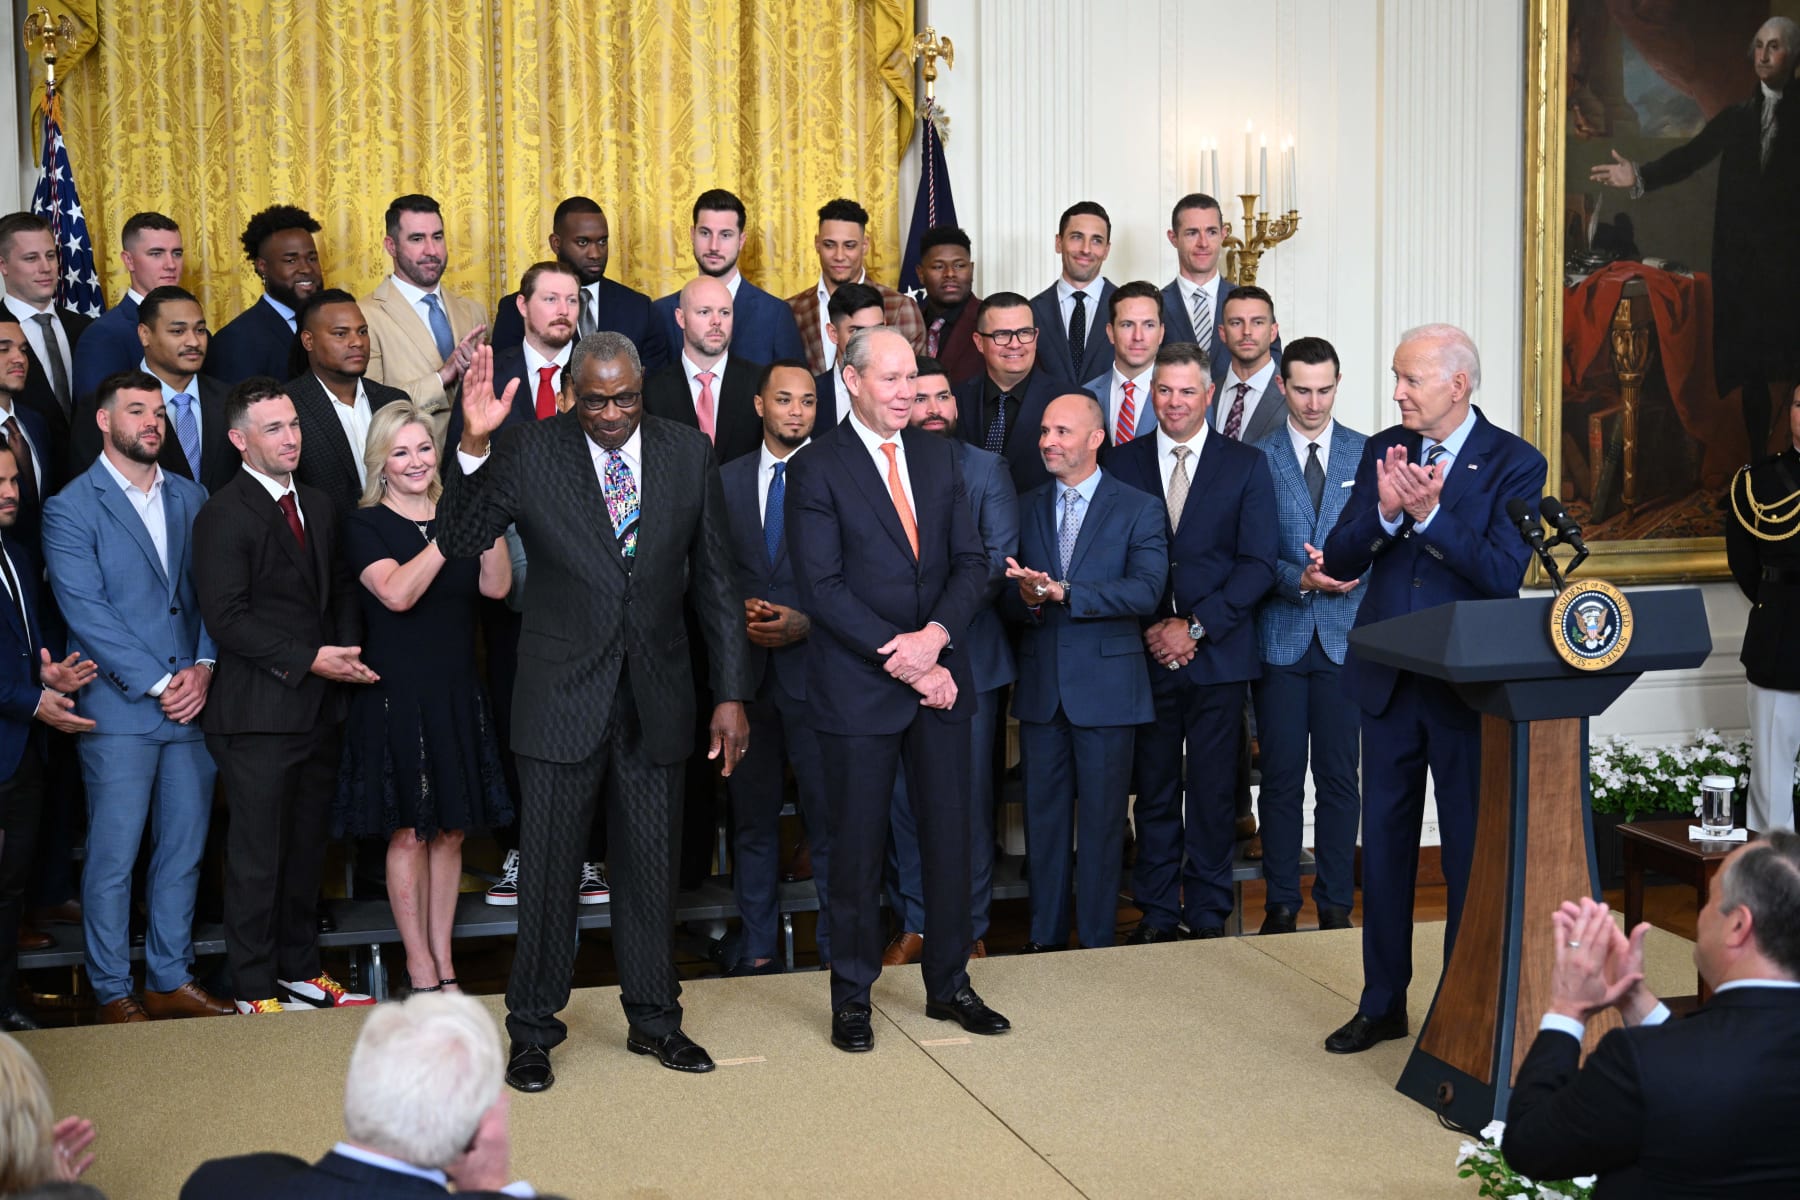 Astros, Aces to celebrate titles with White House visit in August